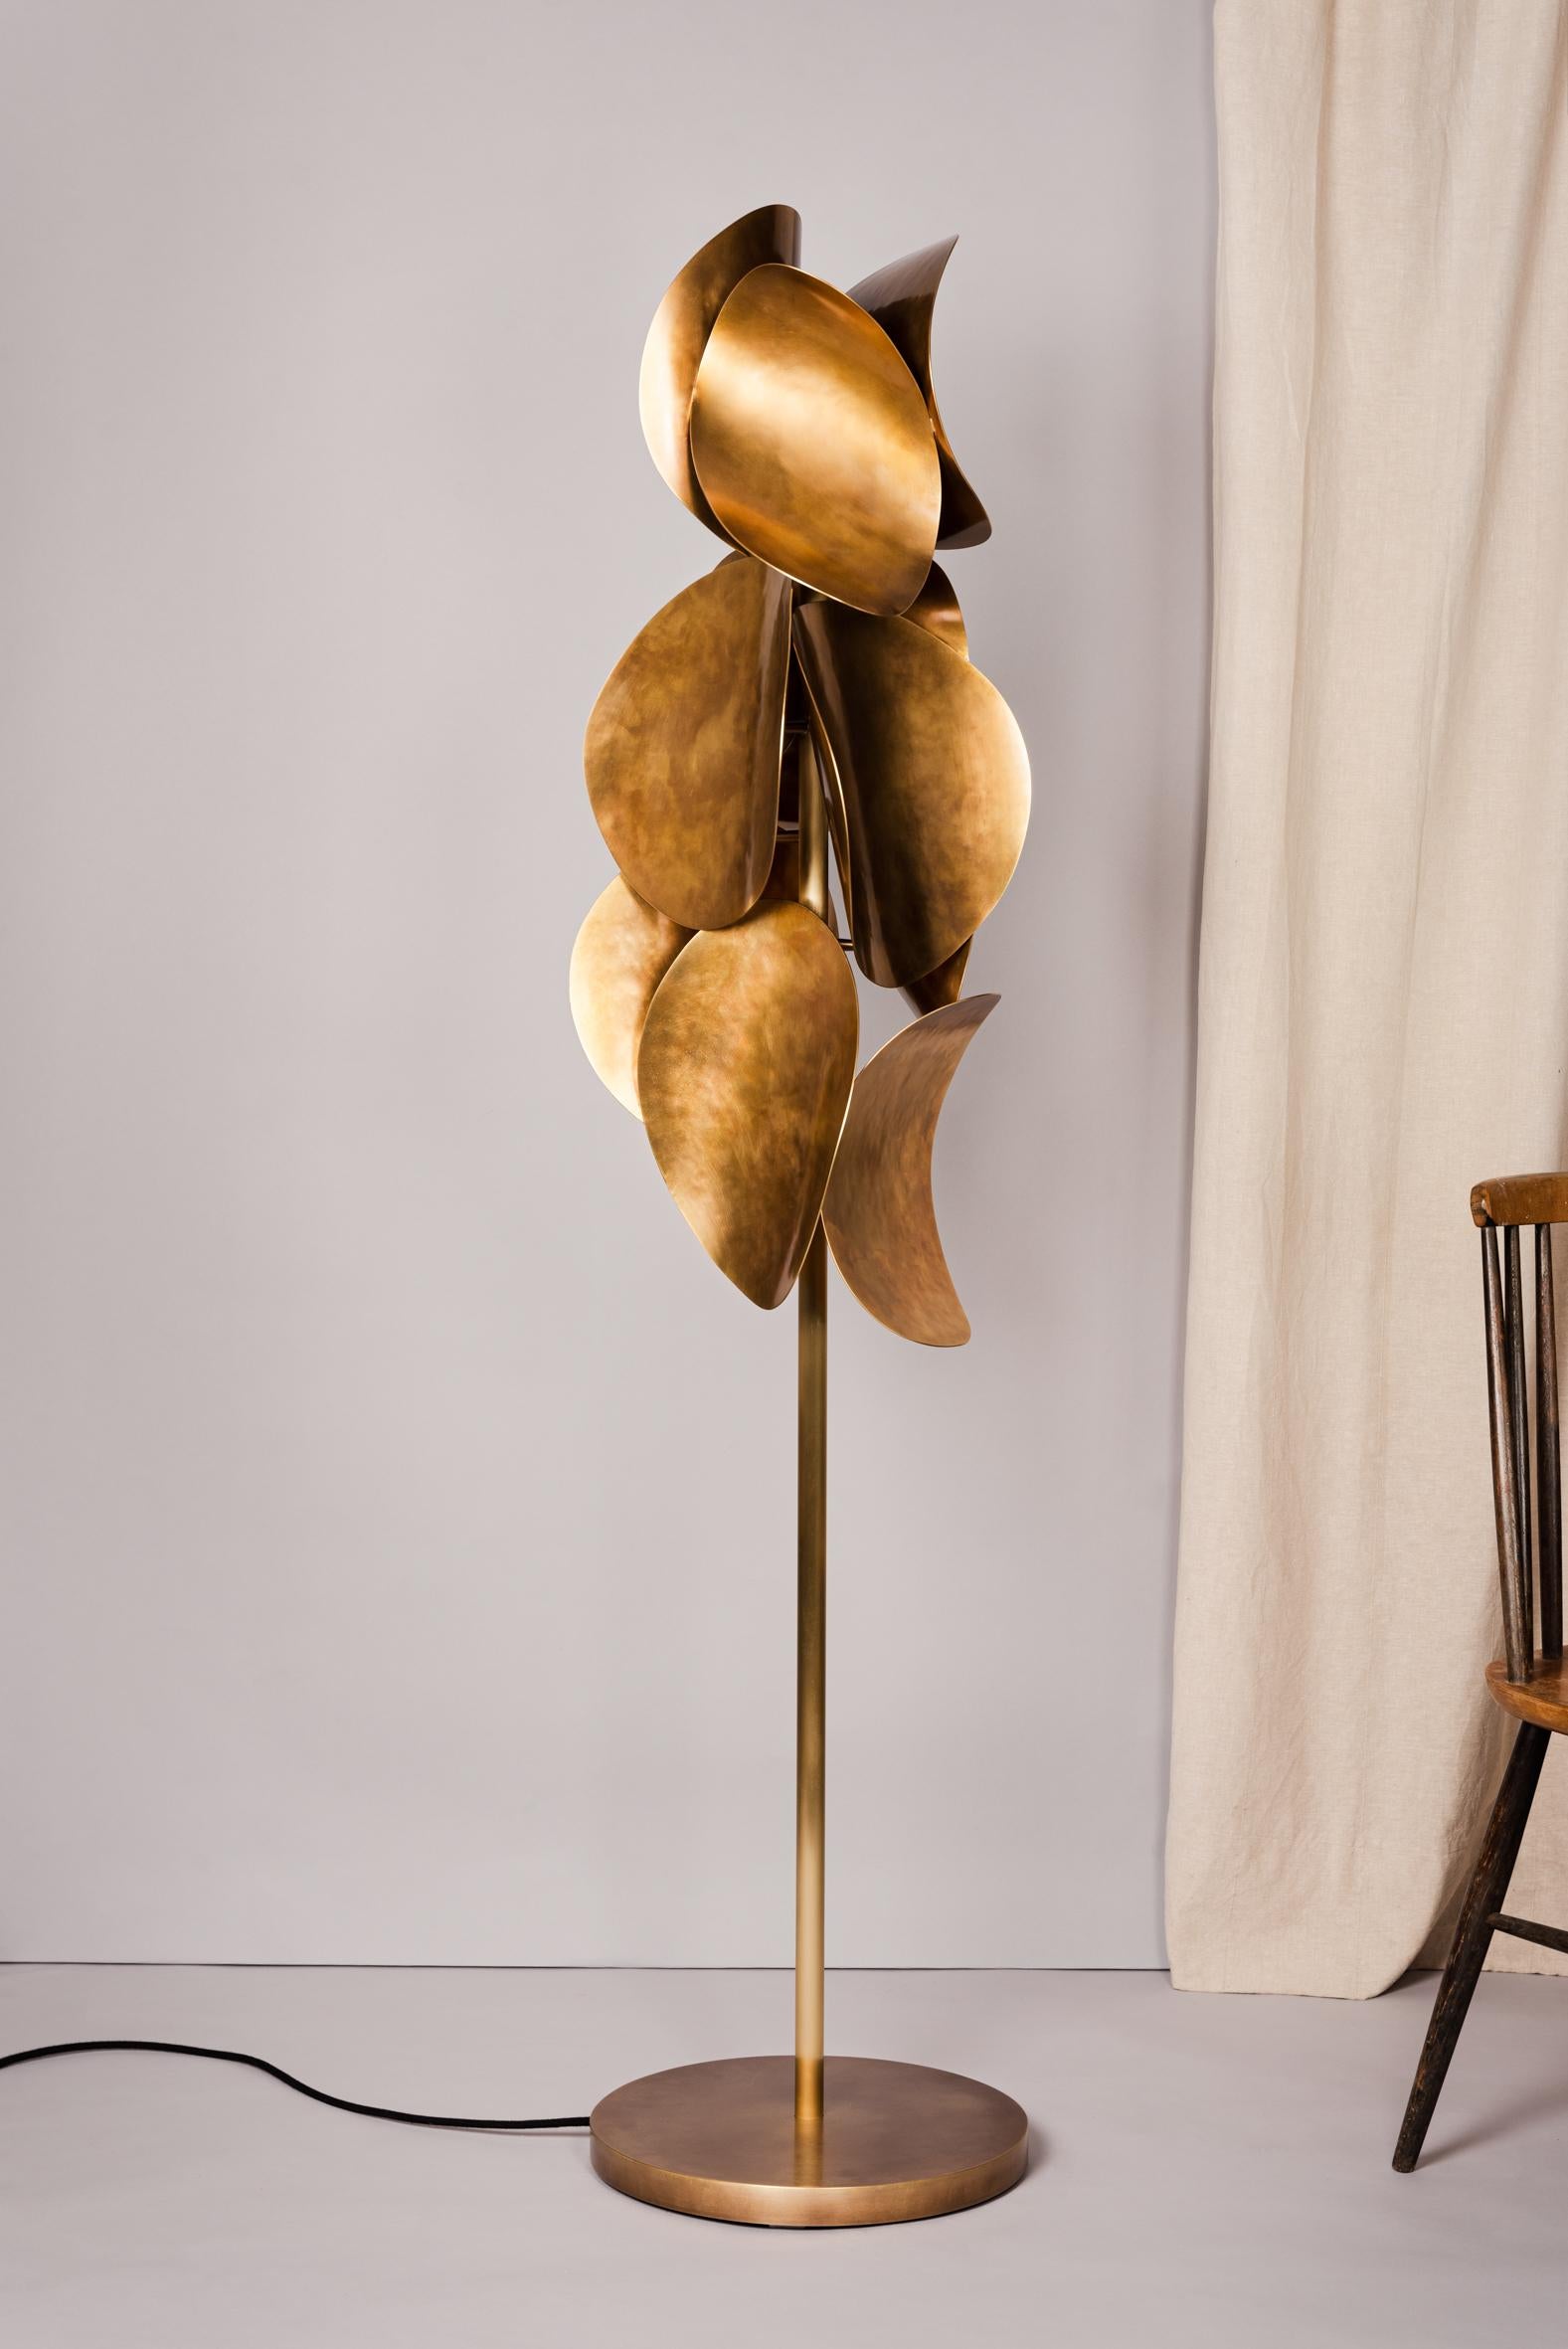 Echo Floor Lamp by Atelier Demichelis
Numbered and Signed
Dimensions: D 38 x H 166 cm
Materials: Patinated and Varnished Brass.


Laura Demichelis

Laura was born & brought up in Provence, in the south of France.
Trained at the École Boulle in